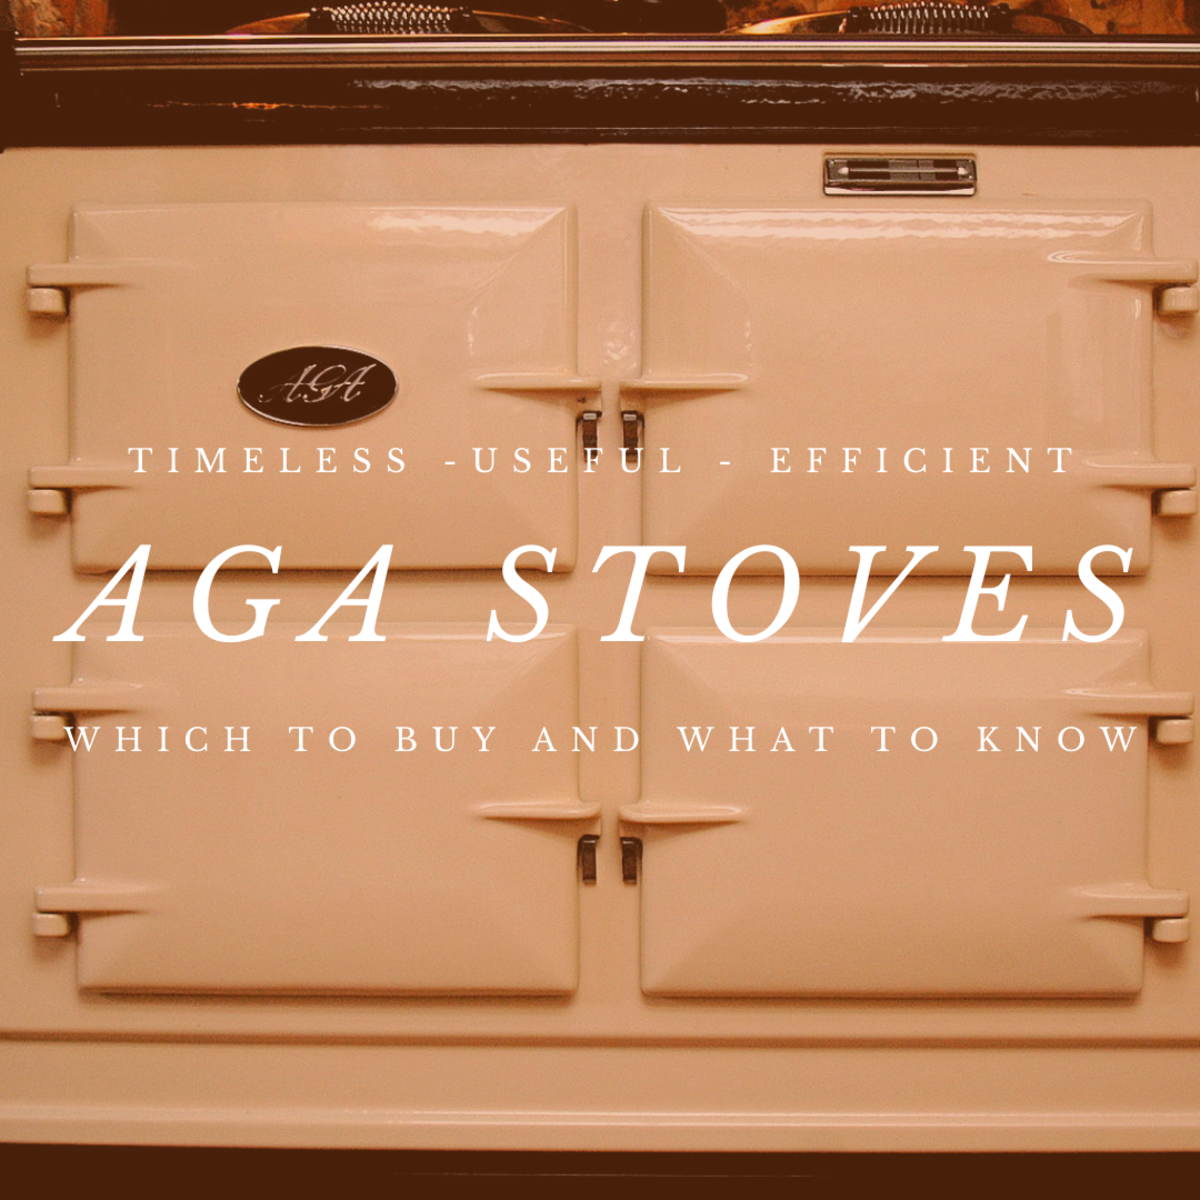 All About The Aga Range: A Kitchen Classic